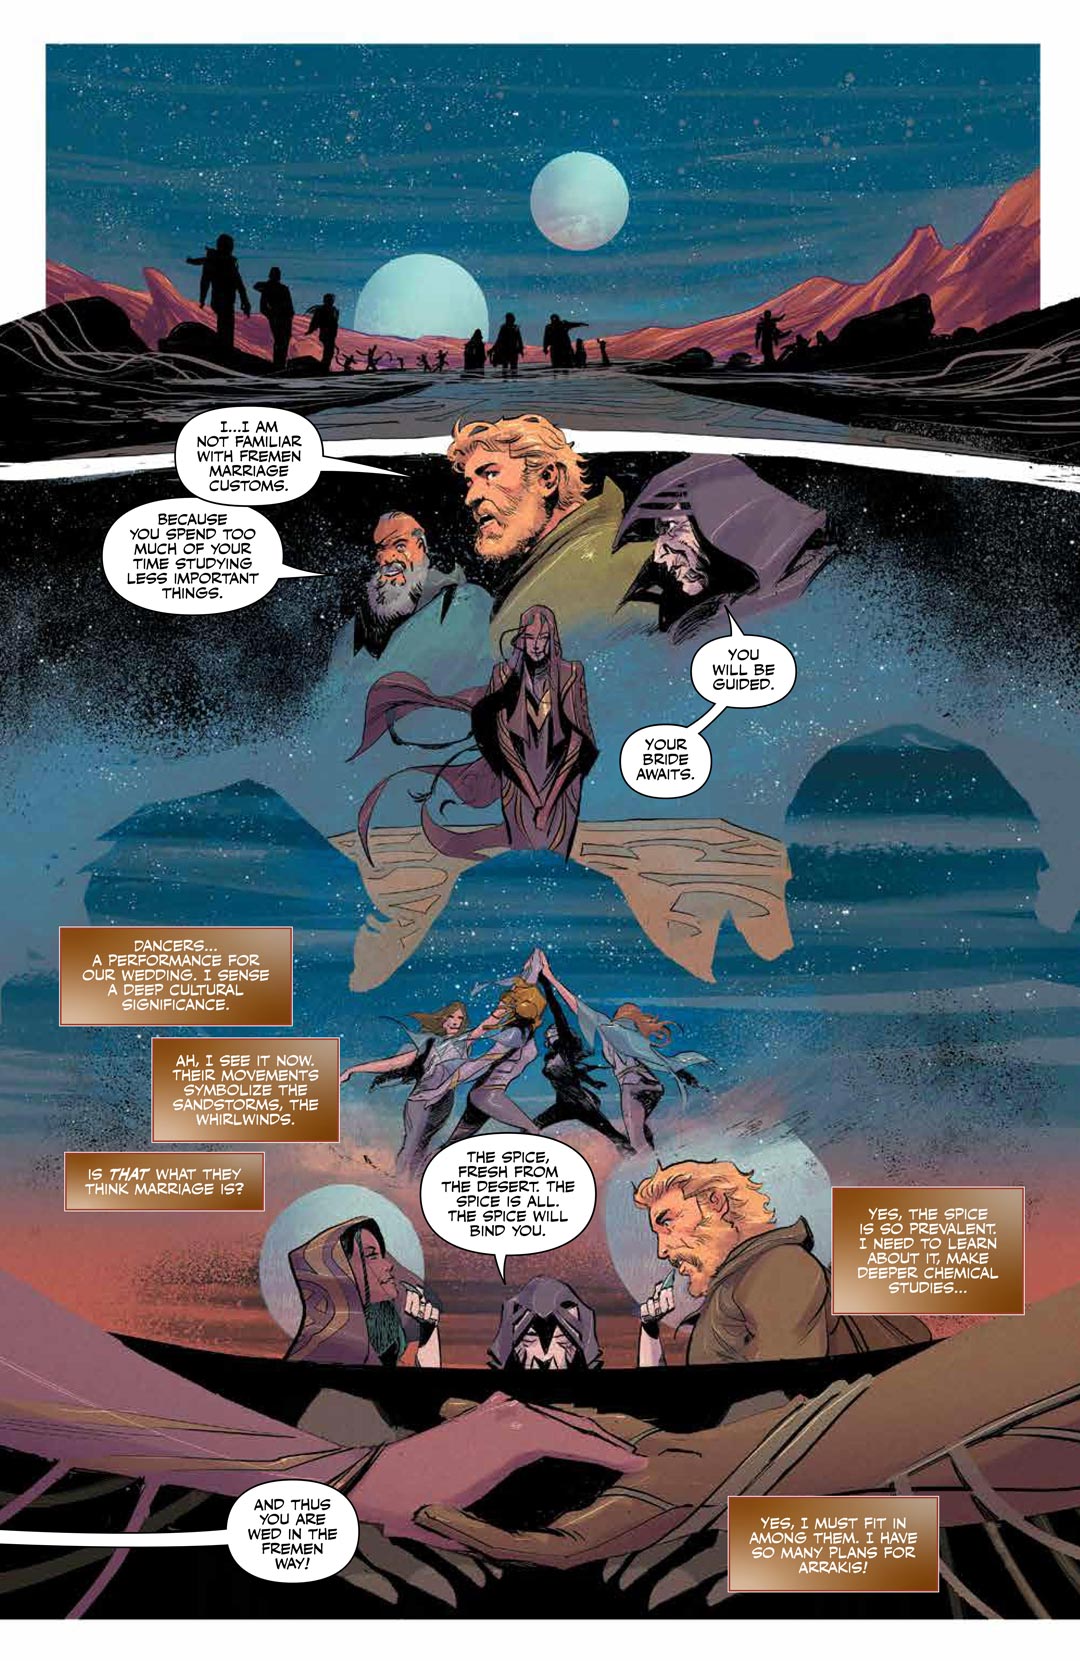 Dune: House Atreides comic series. Issue #7, preview page 3.